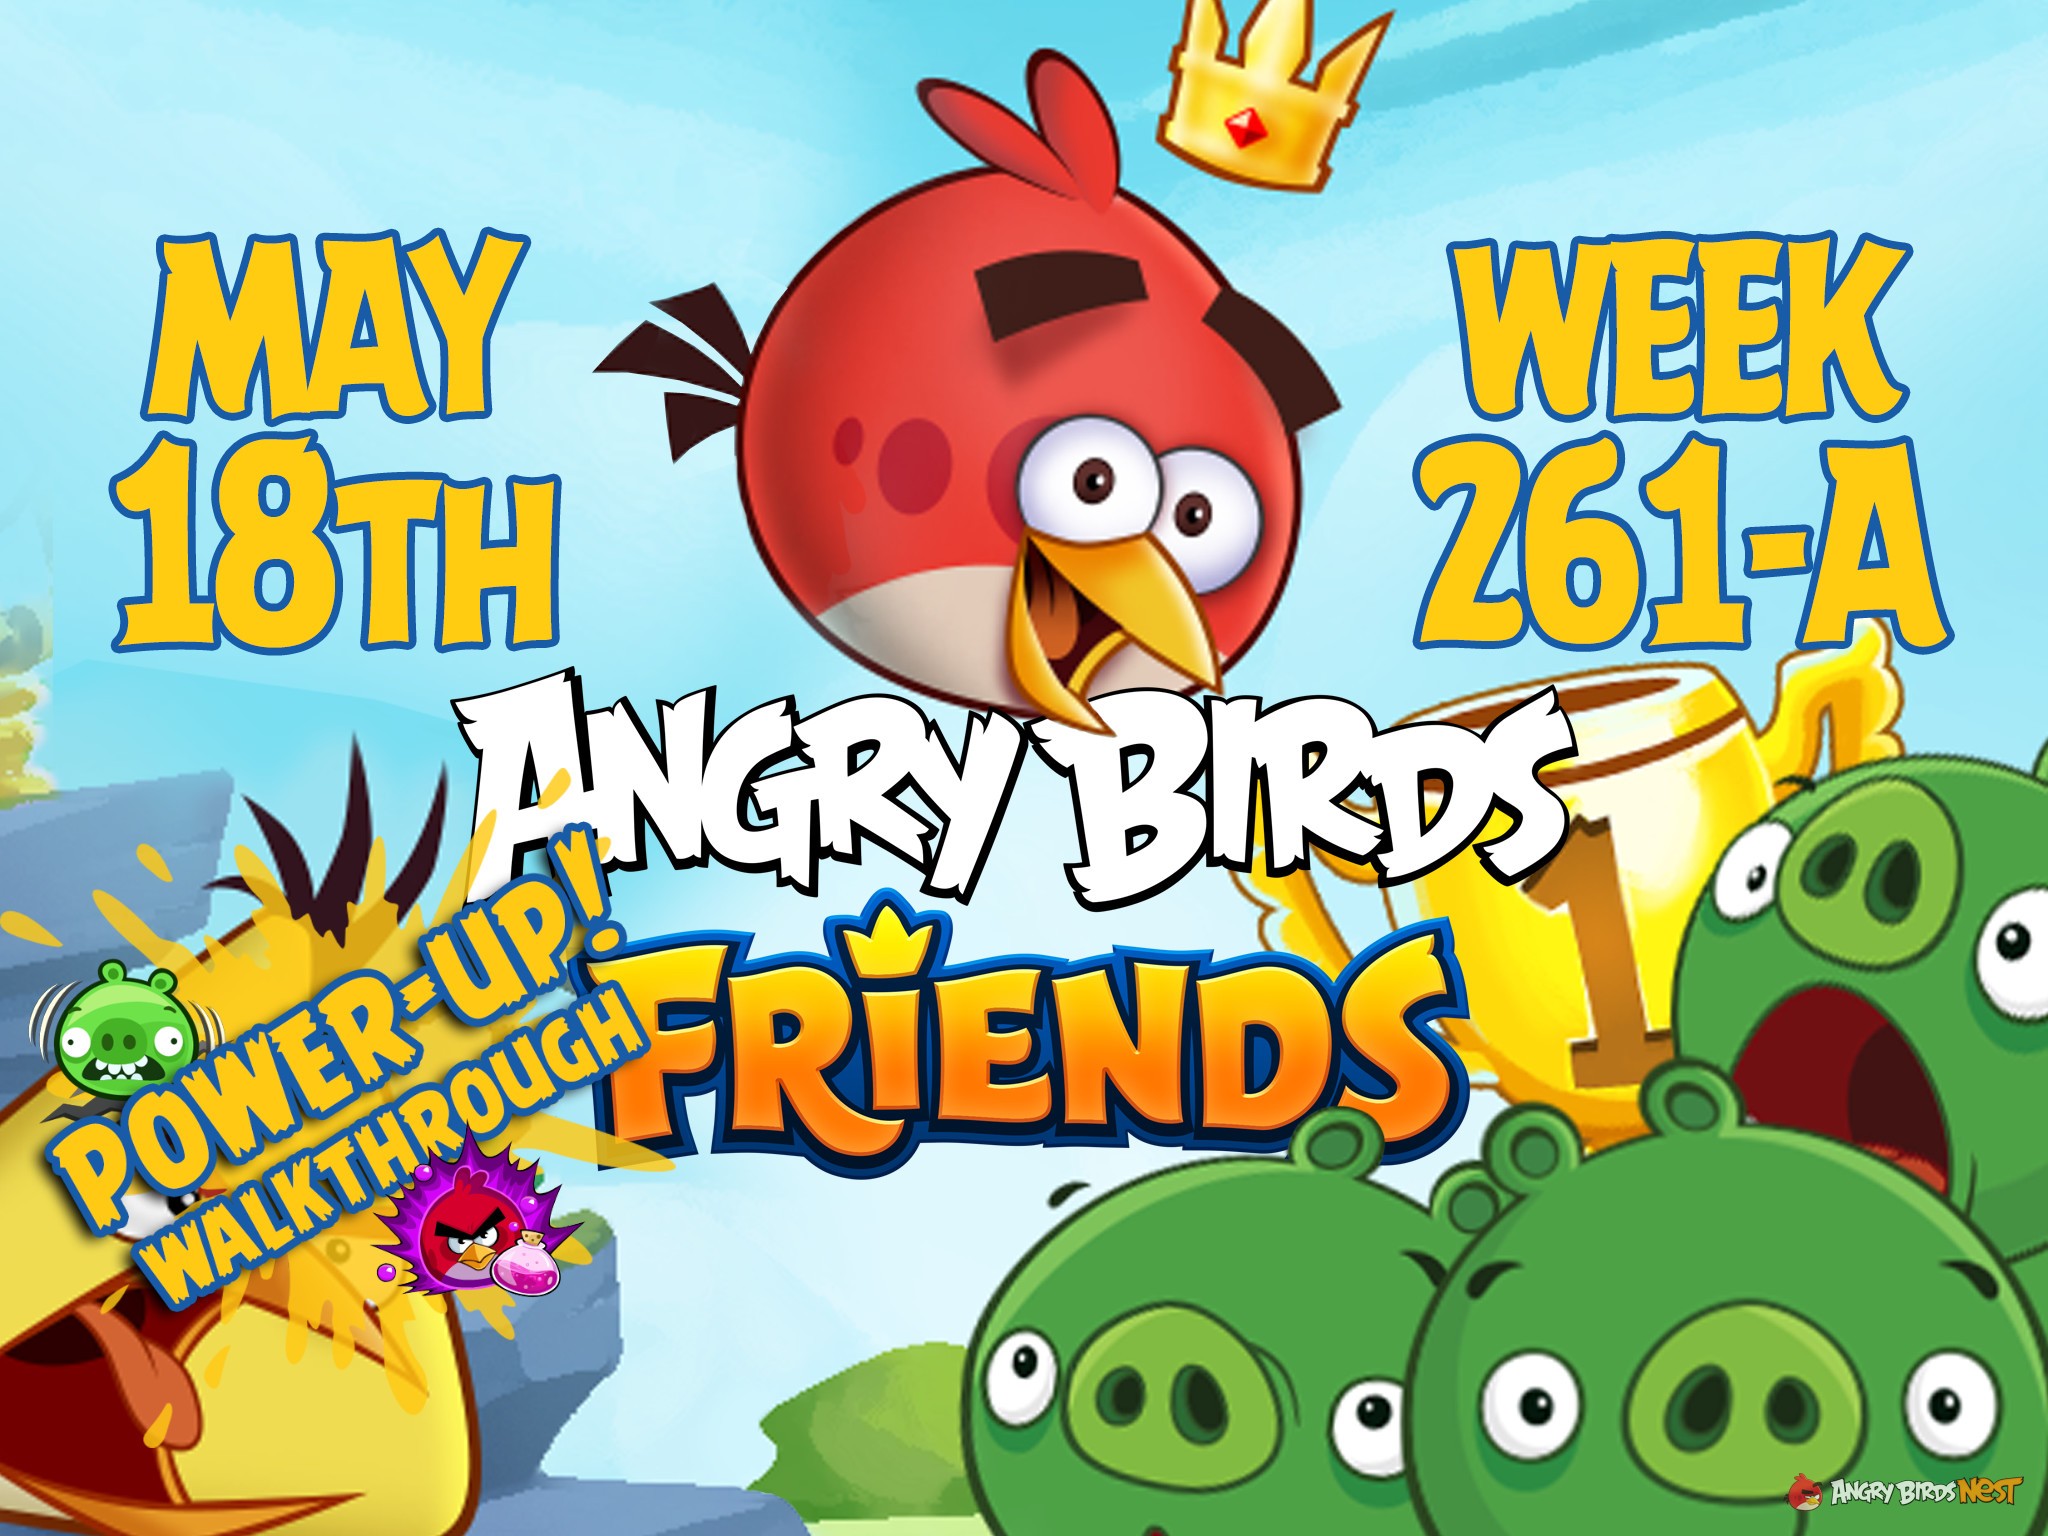 Angry Birds Friends Tournament Week 261-A Feature Image PU